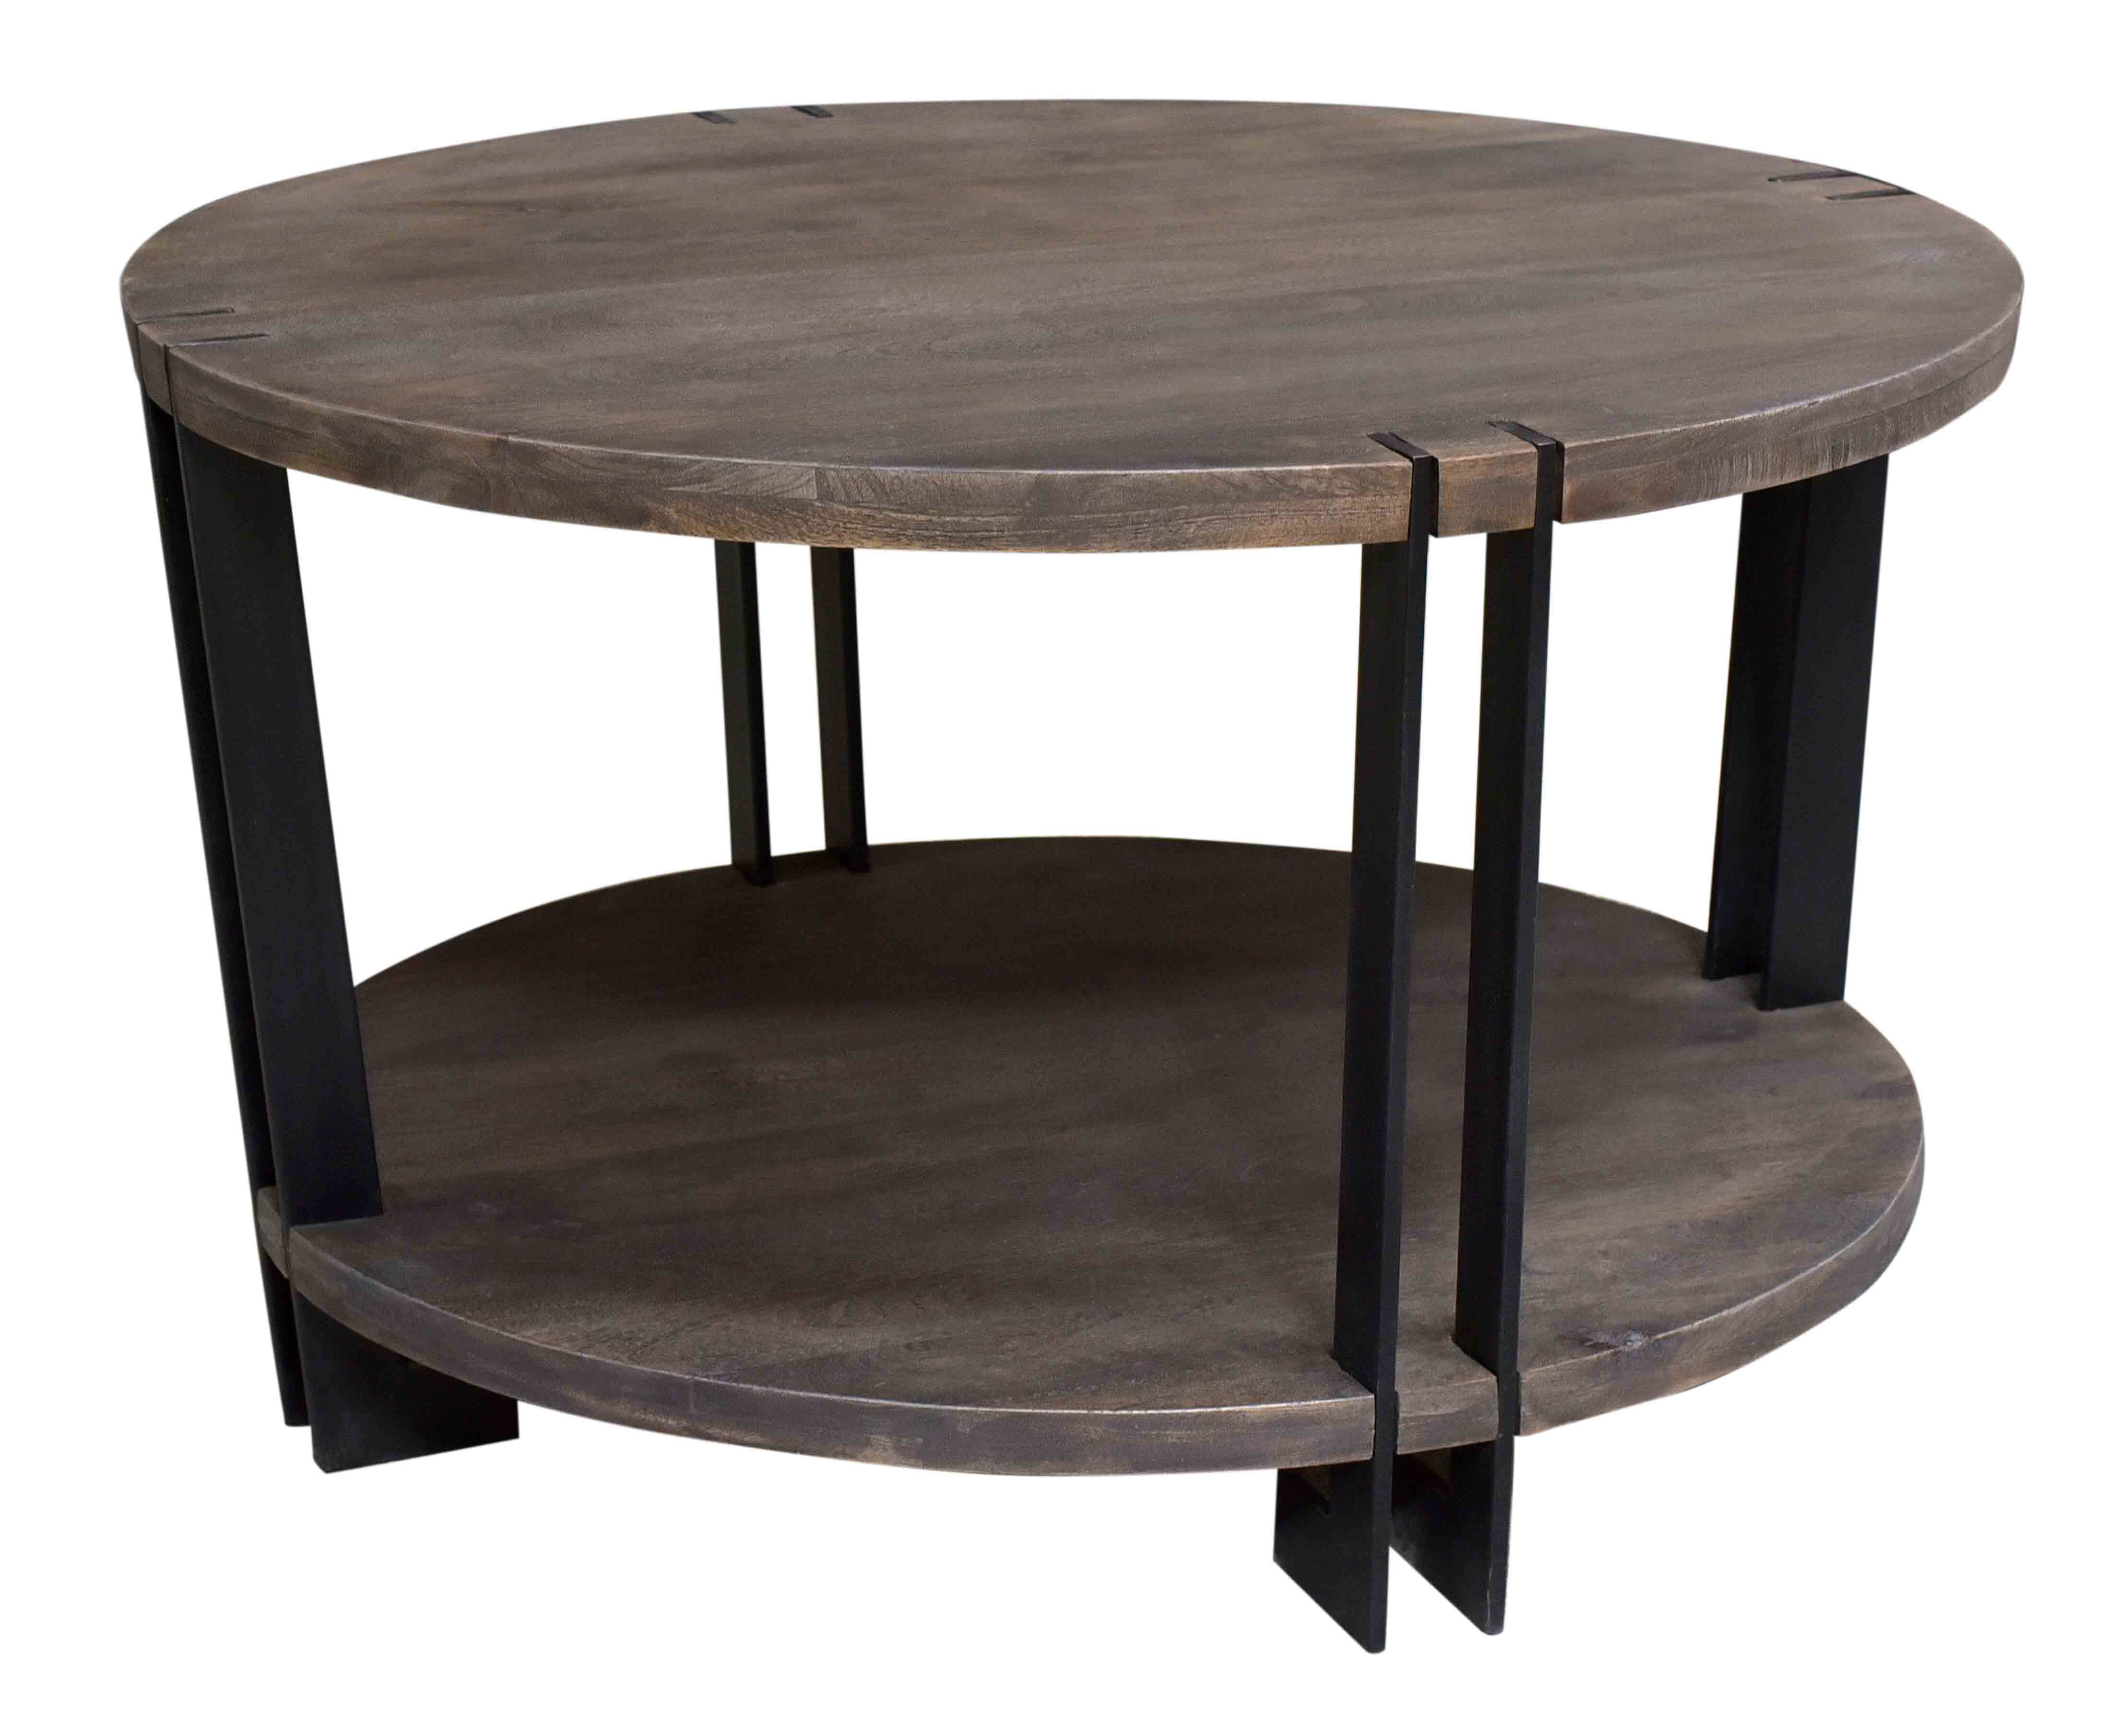 Crestview Bengal Manor Iron And Acacia Wood Round Coffee Table Wayfair inside sizing 4432 X 3620